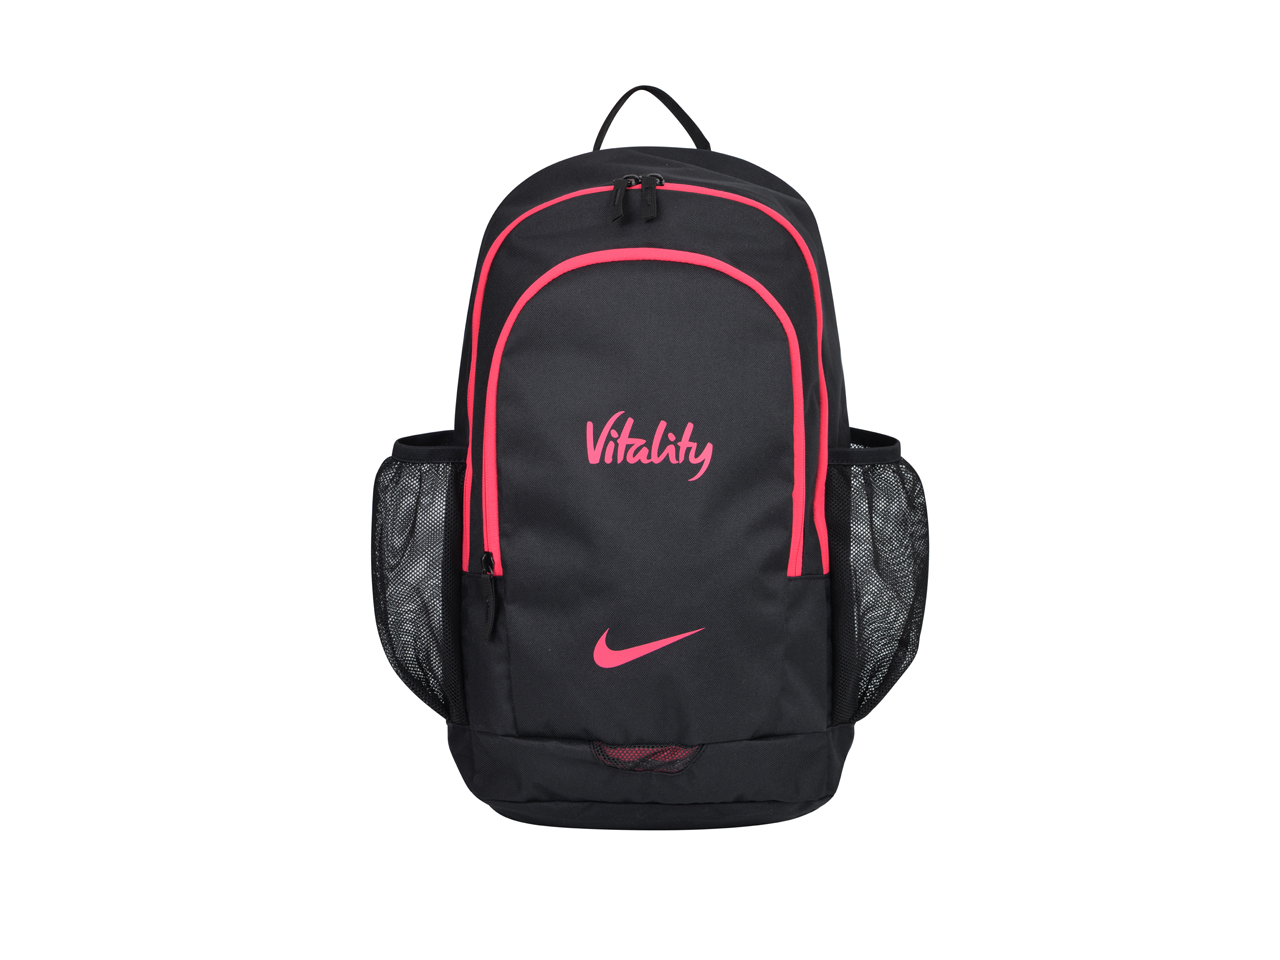 Vitality collection backpack by Nike